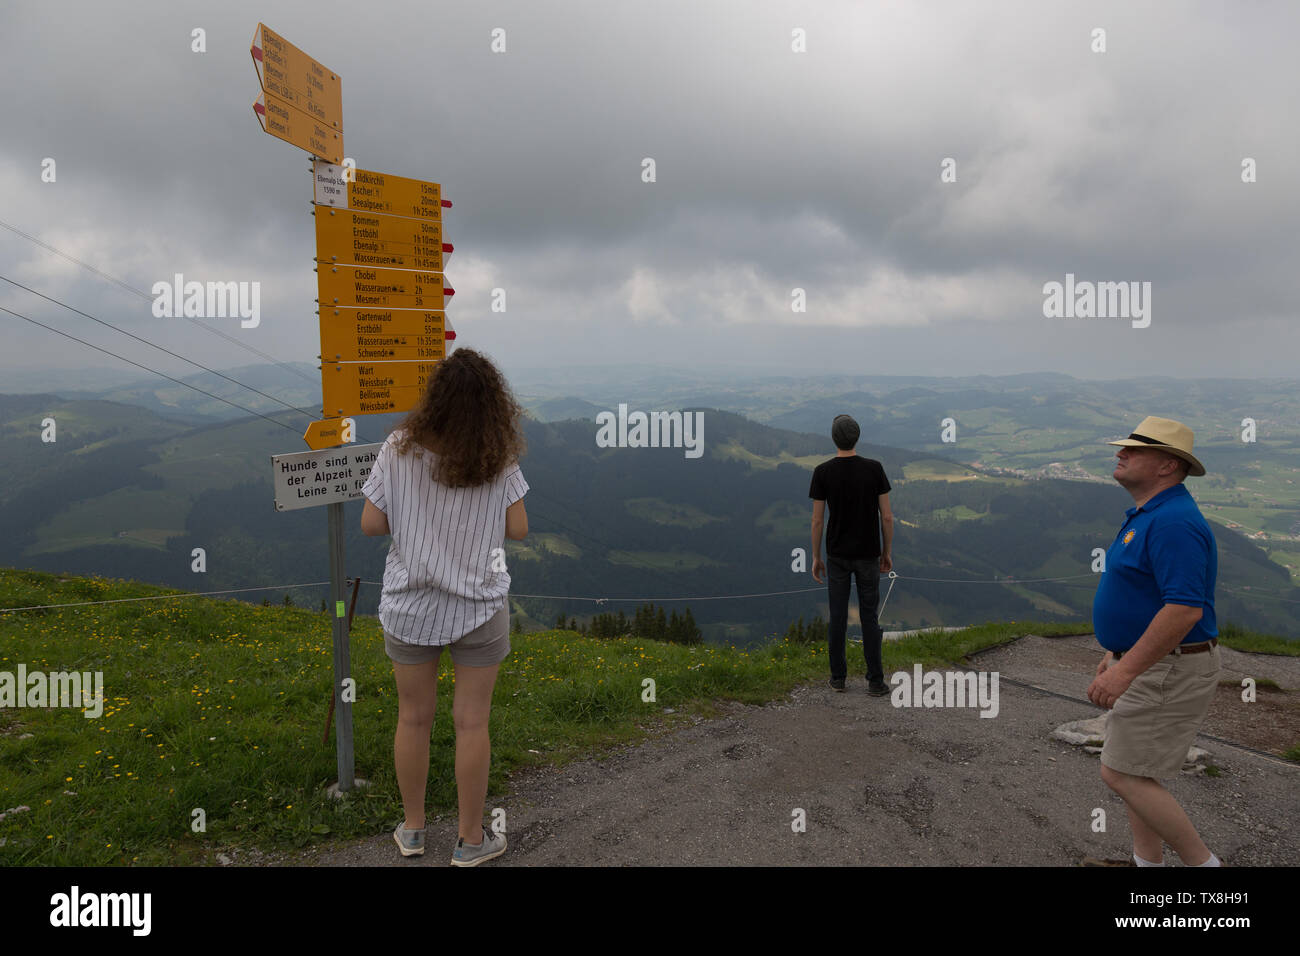 Lost tourists checking the signpost for directions on a cloudy Swiss day atop Ebenalp Mountain in Appenzell, Switzerland. Stock Photo